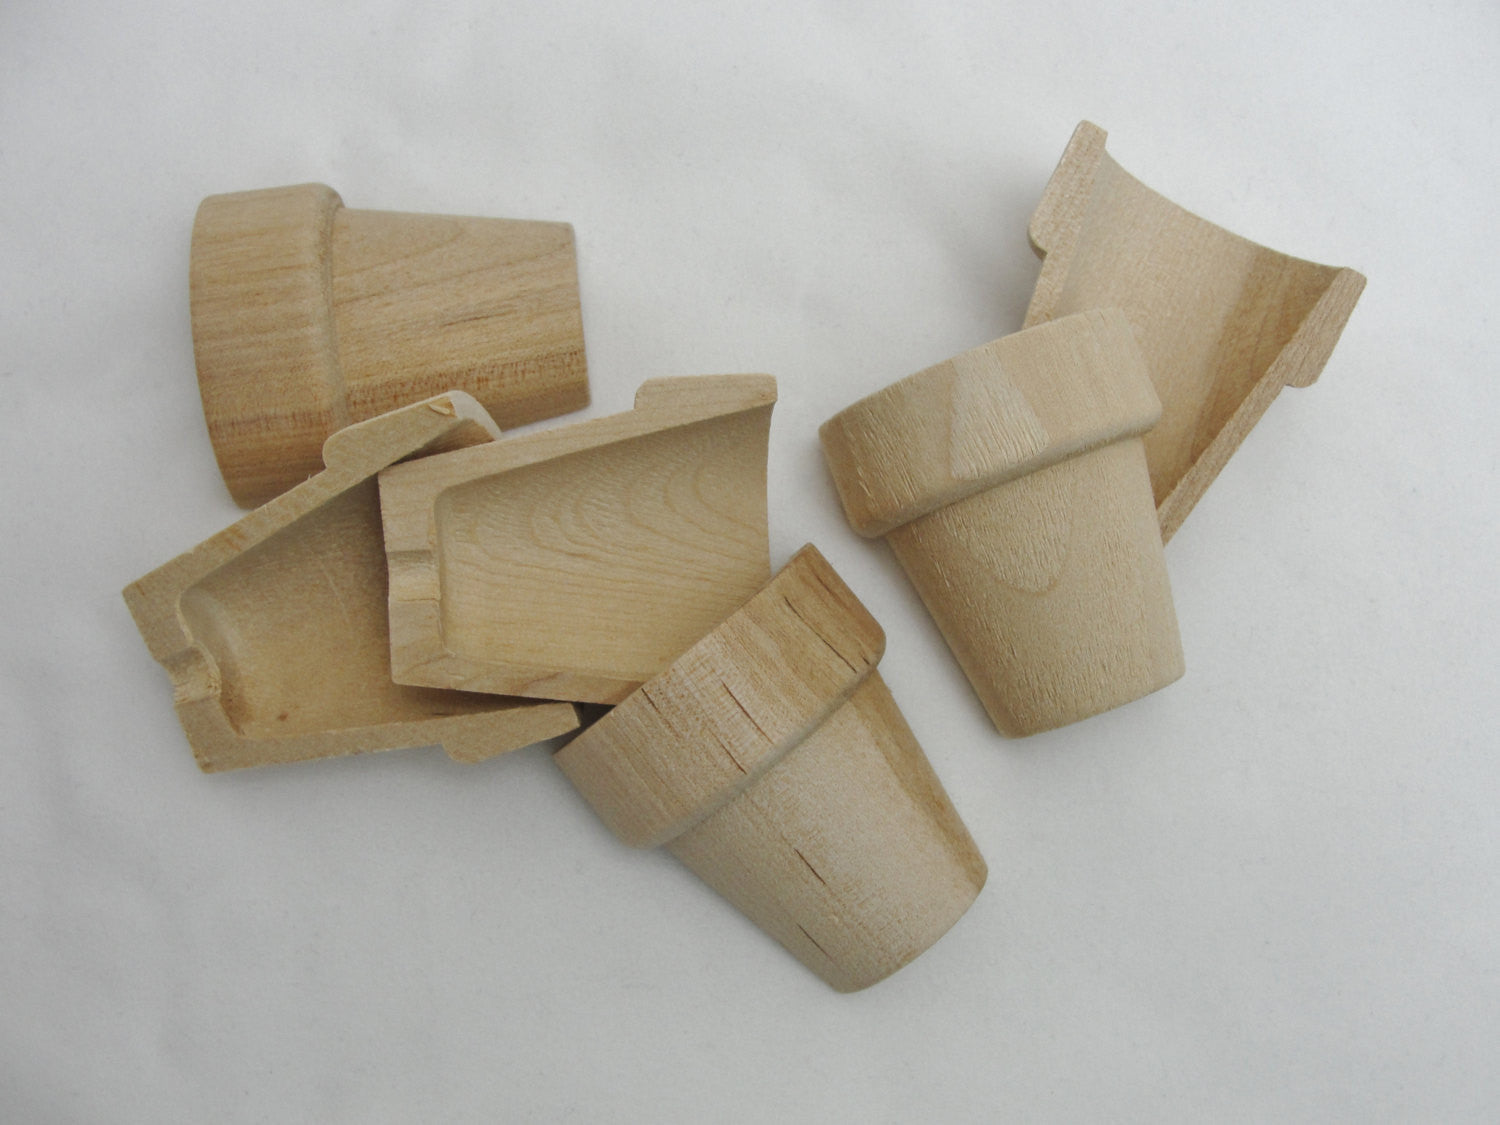 Split wooden flower pot miniature 2" tall set of 6 pieces - Wood parts - Craft Supply House